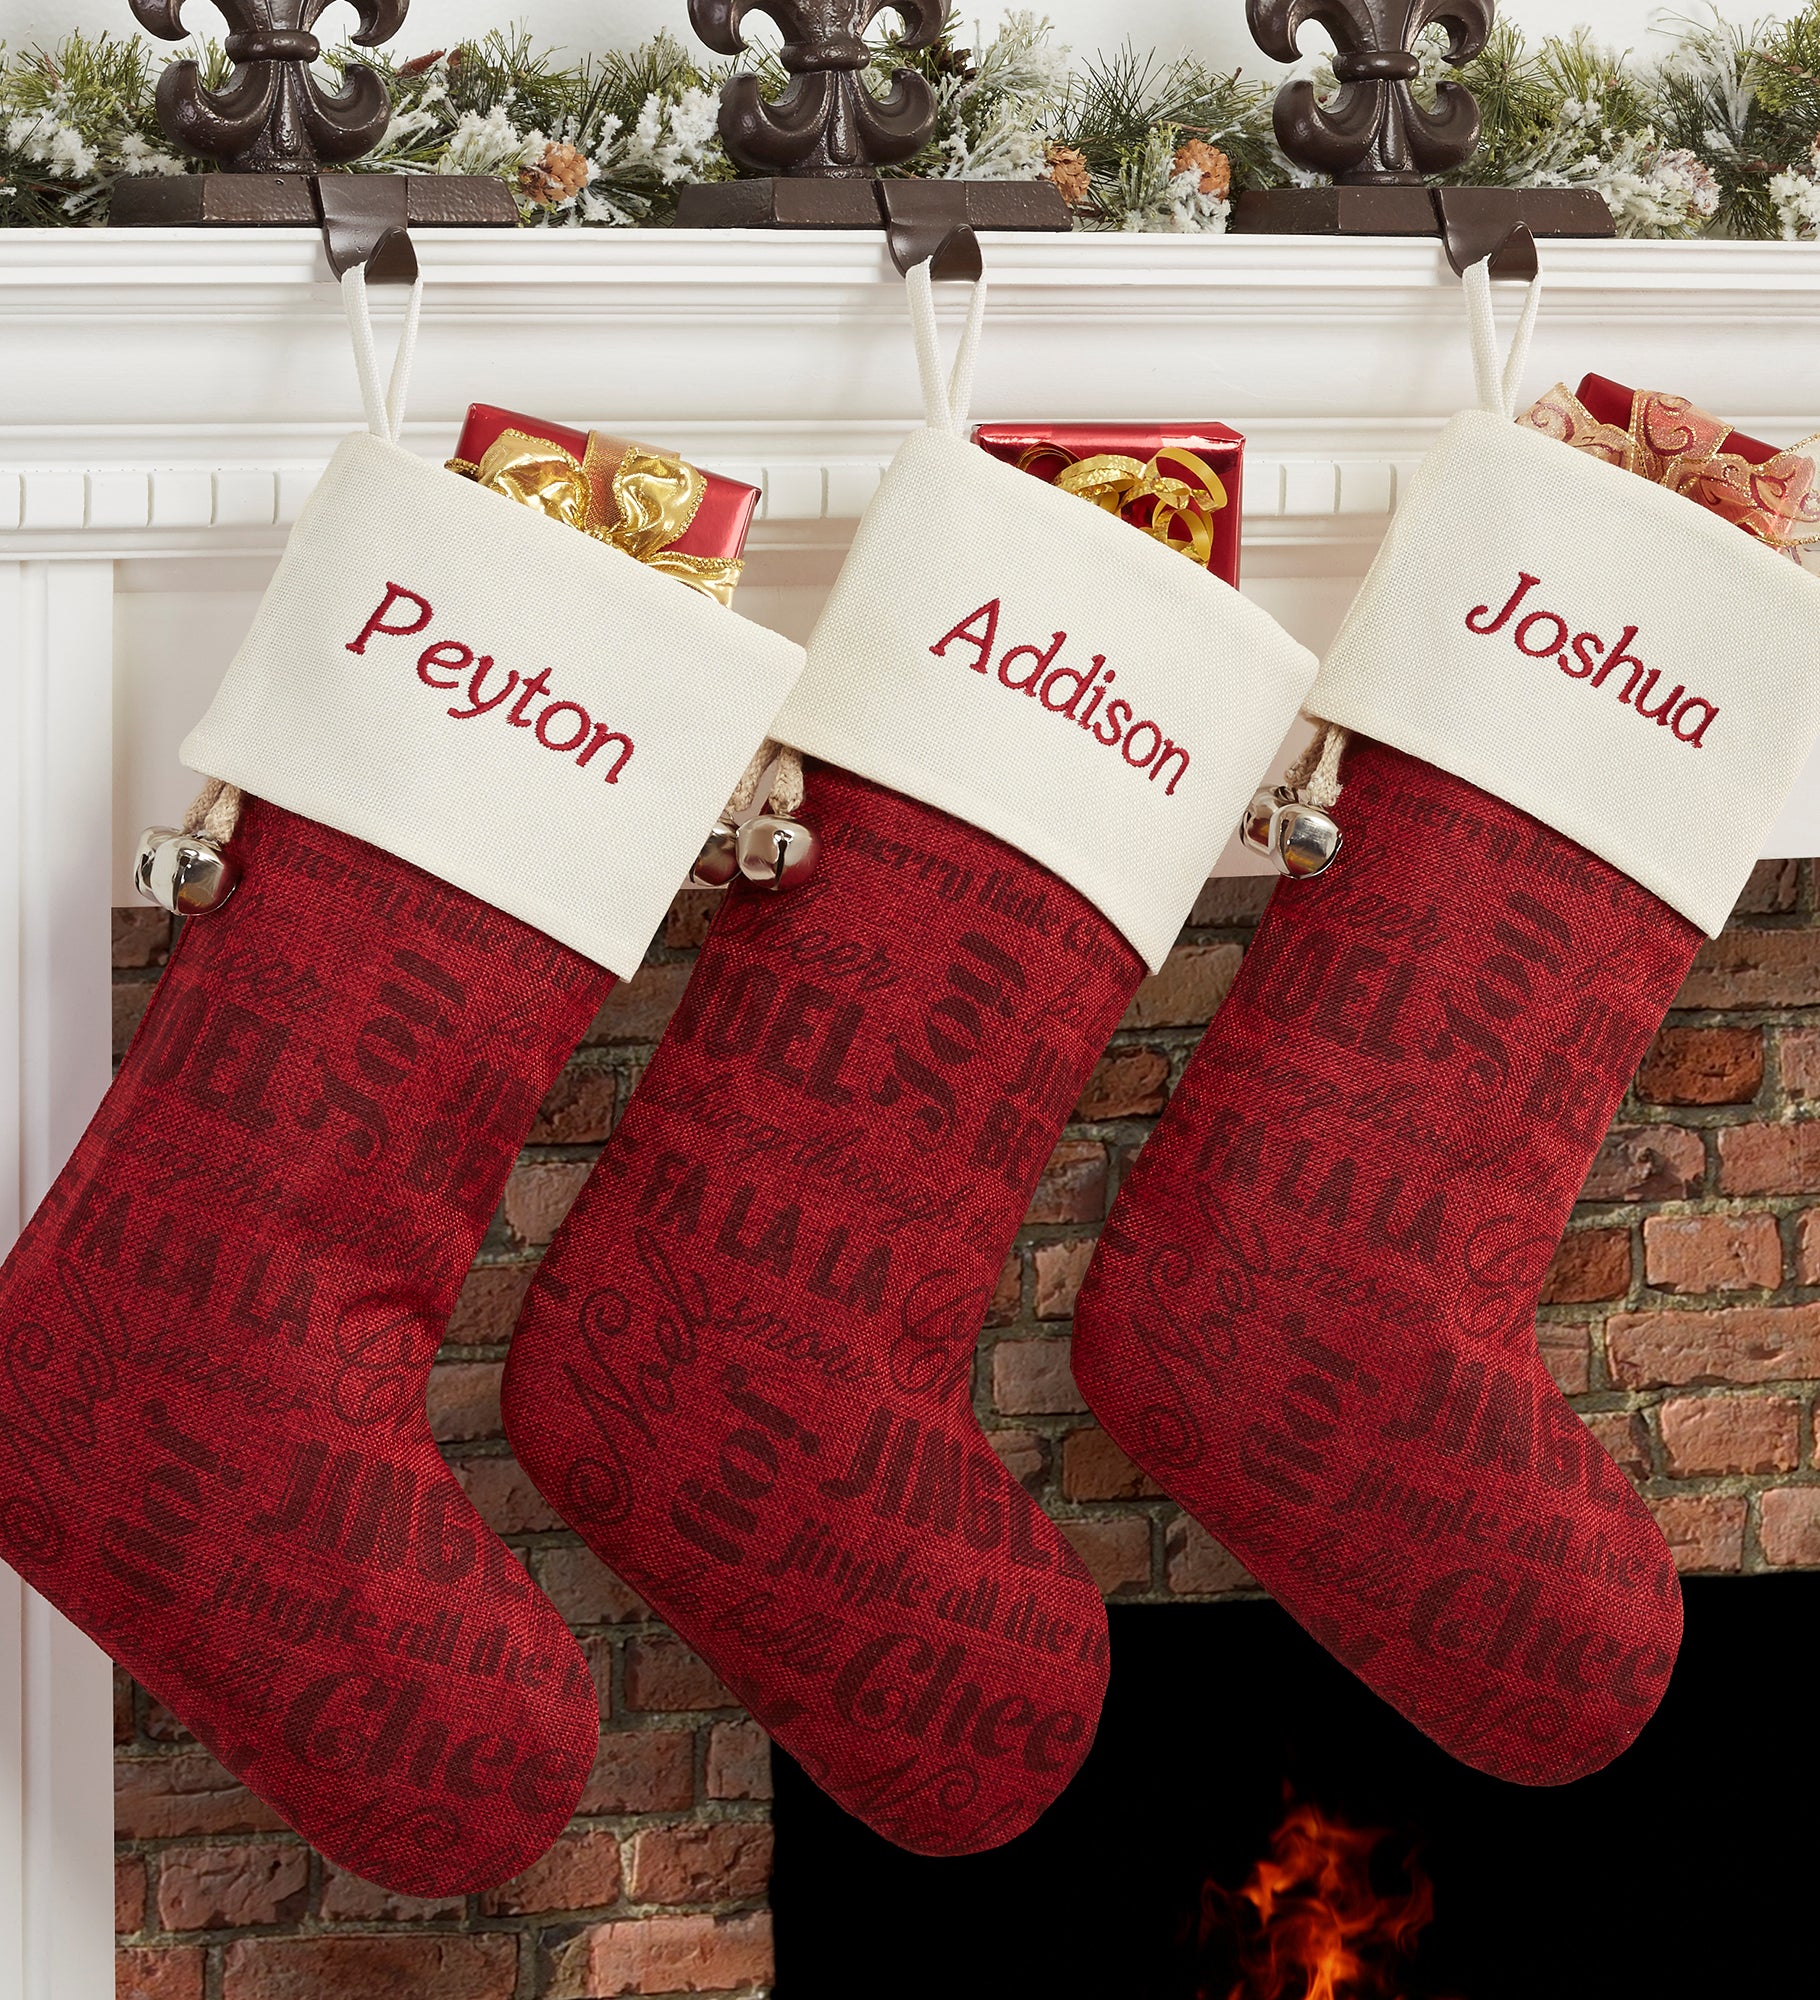 Winter Melody Personalized Christmas Stockings